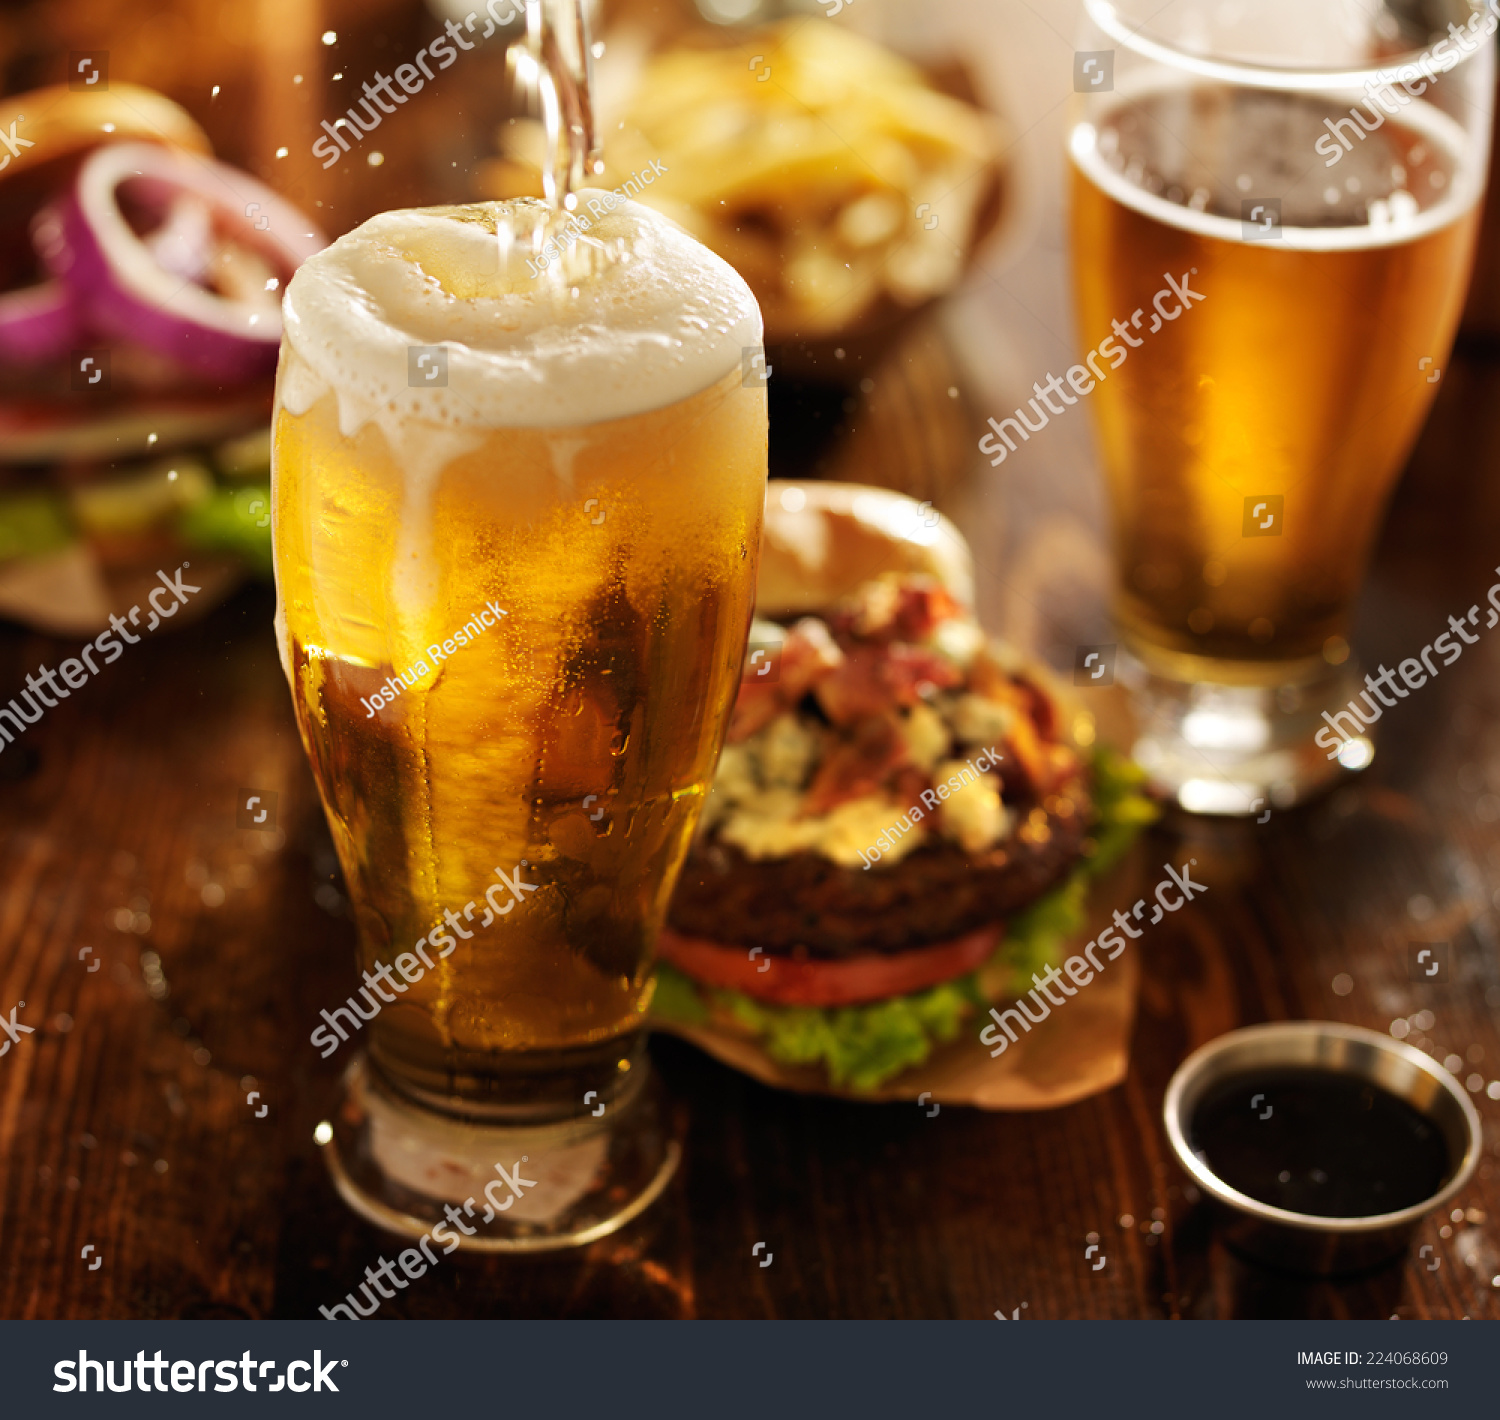 beer being poured into glass with gourmet hamburgers #224068609